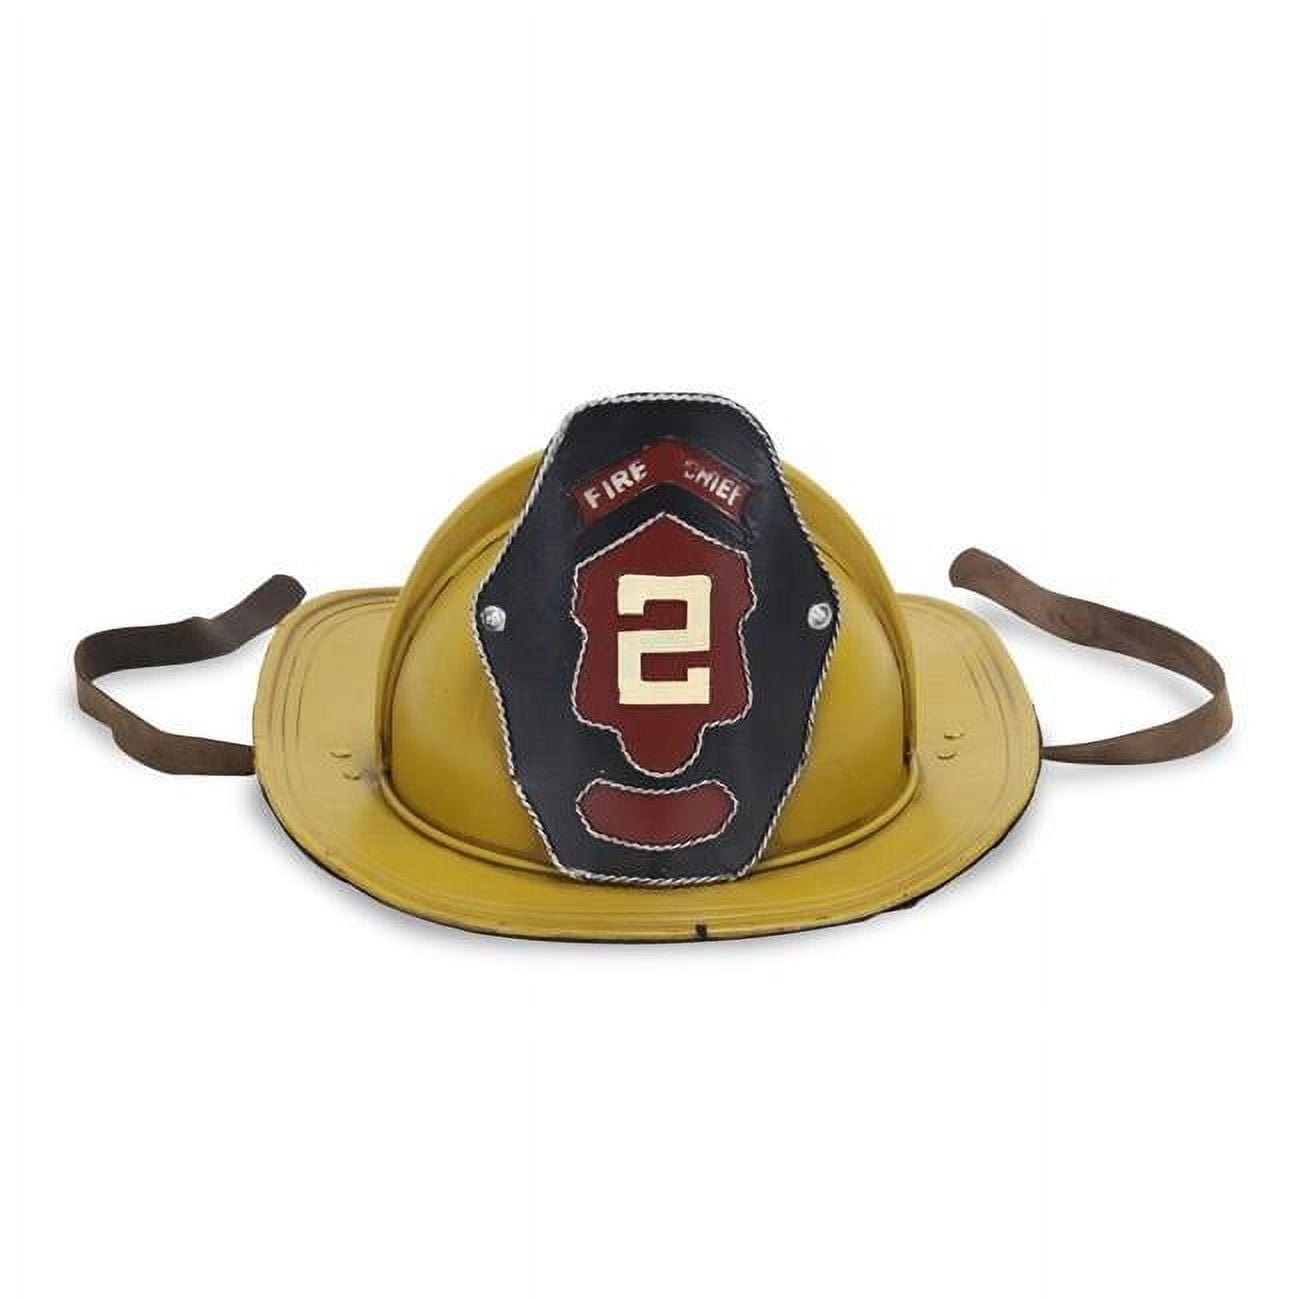 Picture of Cheungs JA-0284Y Decorative Fire Captain Hat, Yellow